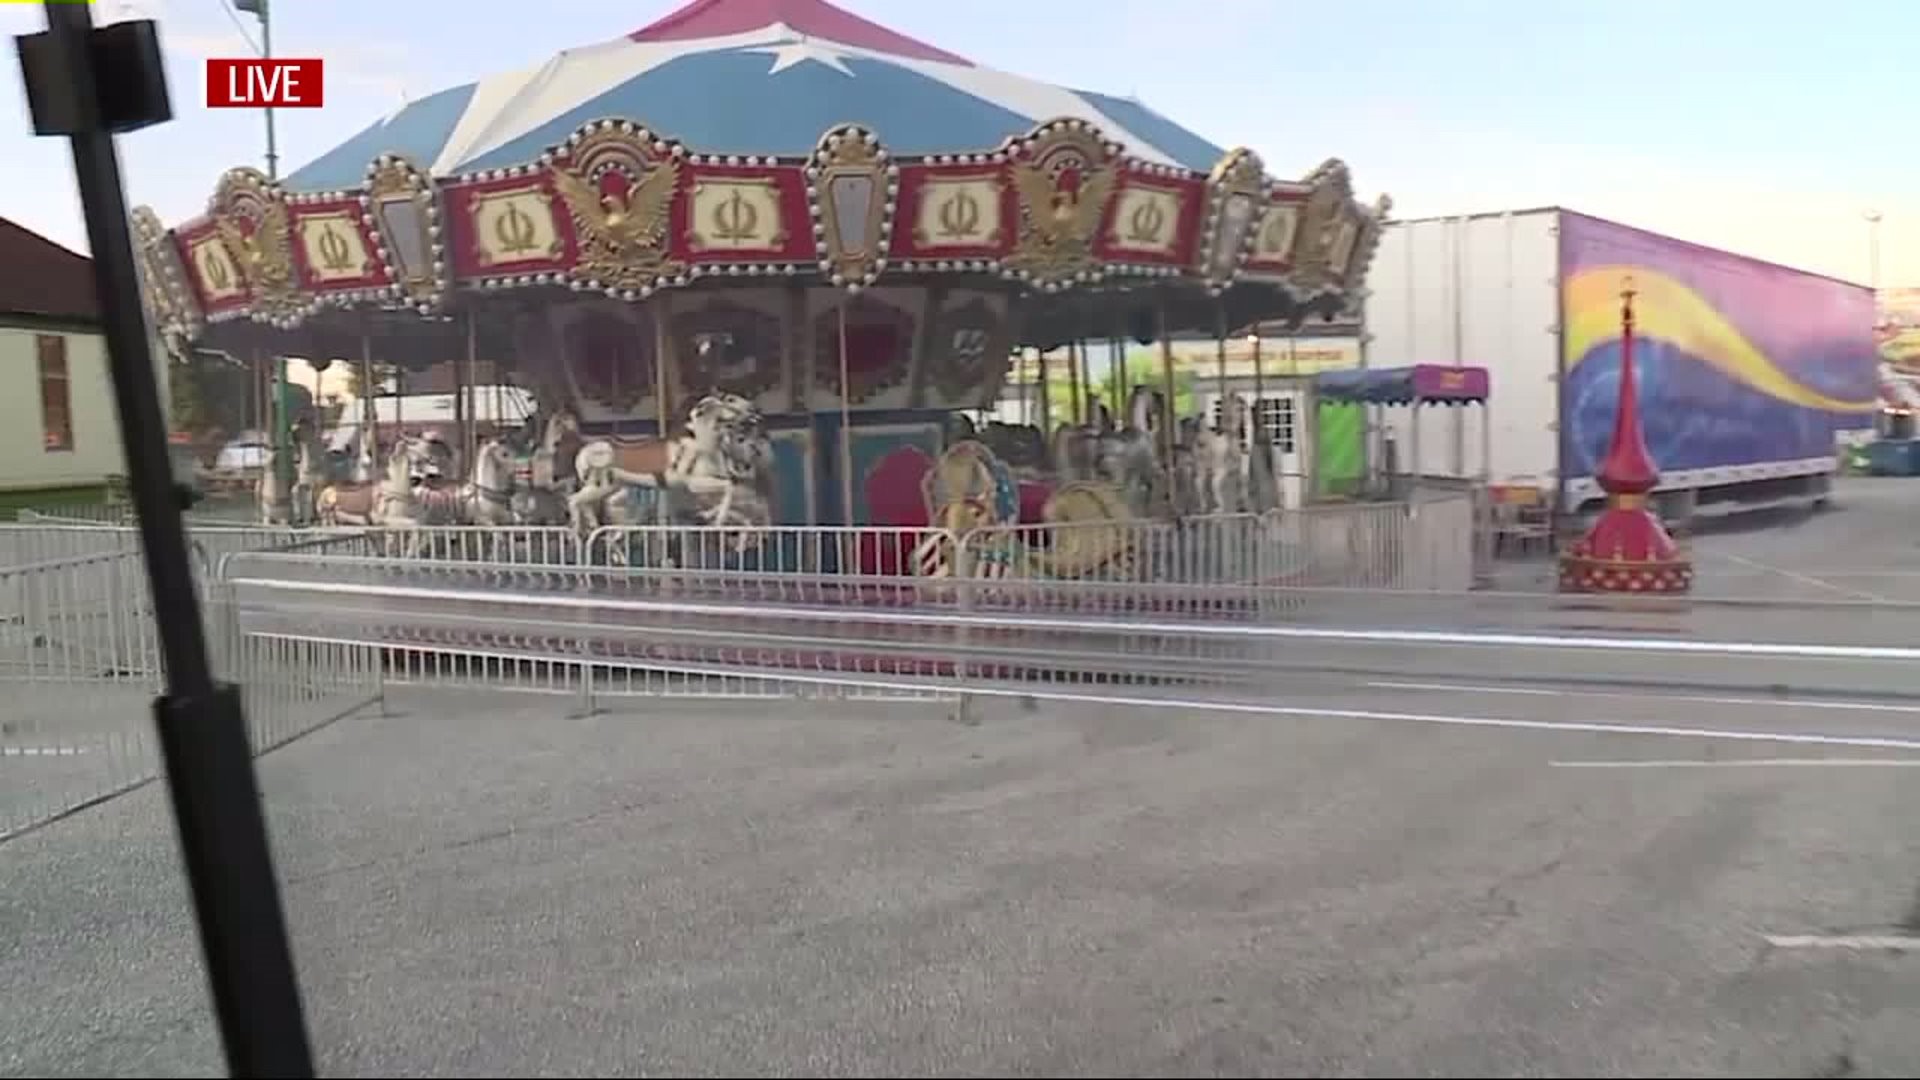 The York Fair kicks off this morning!  Here is a sneak peak at some of the things going on this year.